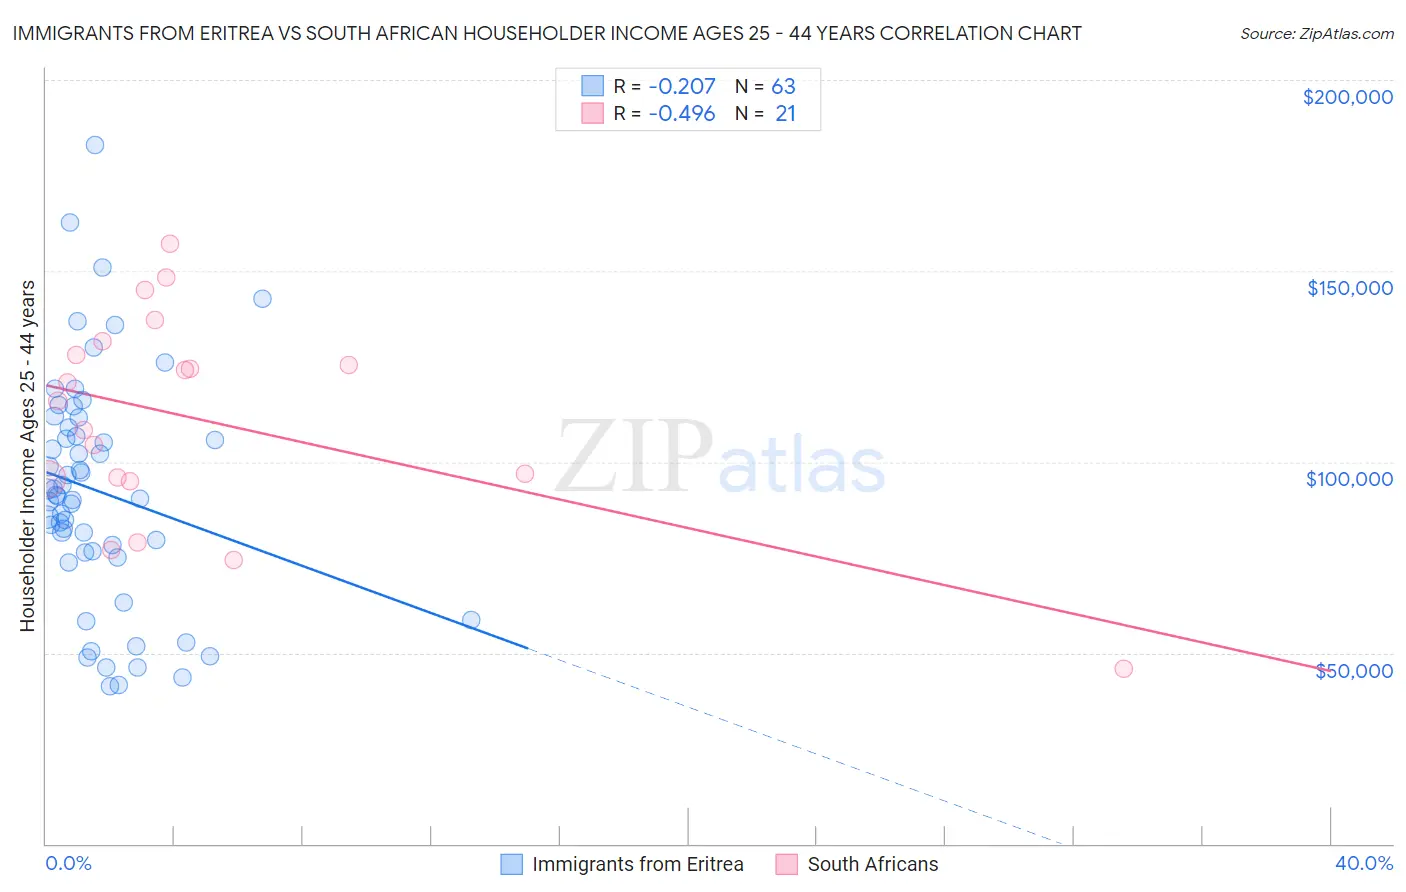 Immigrants from Eritrea vs South African Householder Income Ages 25 - 44 years